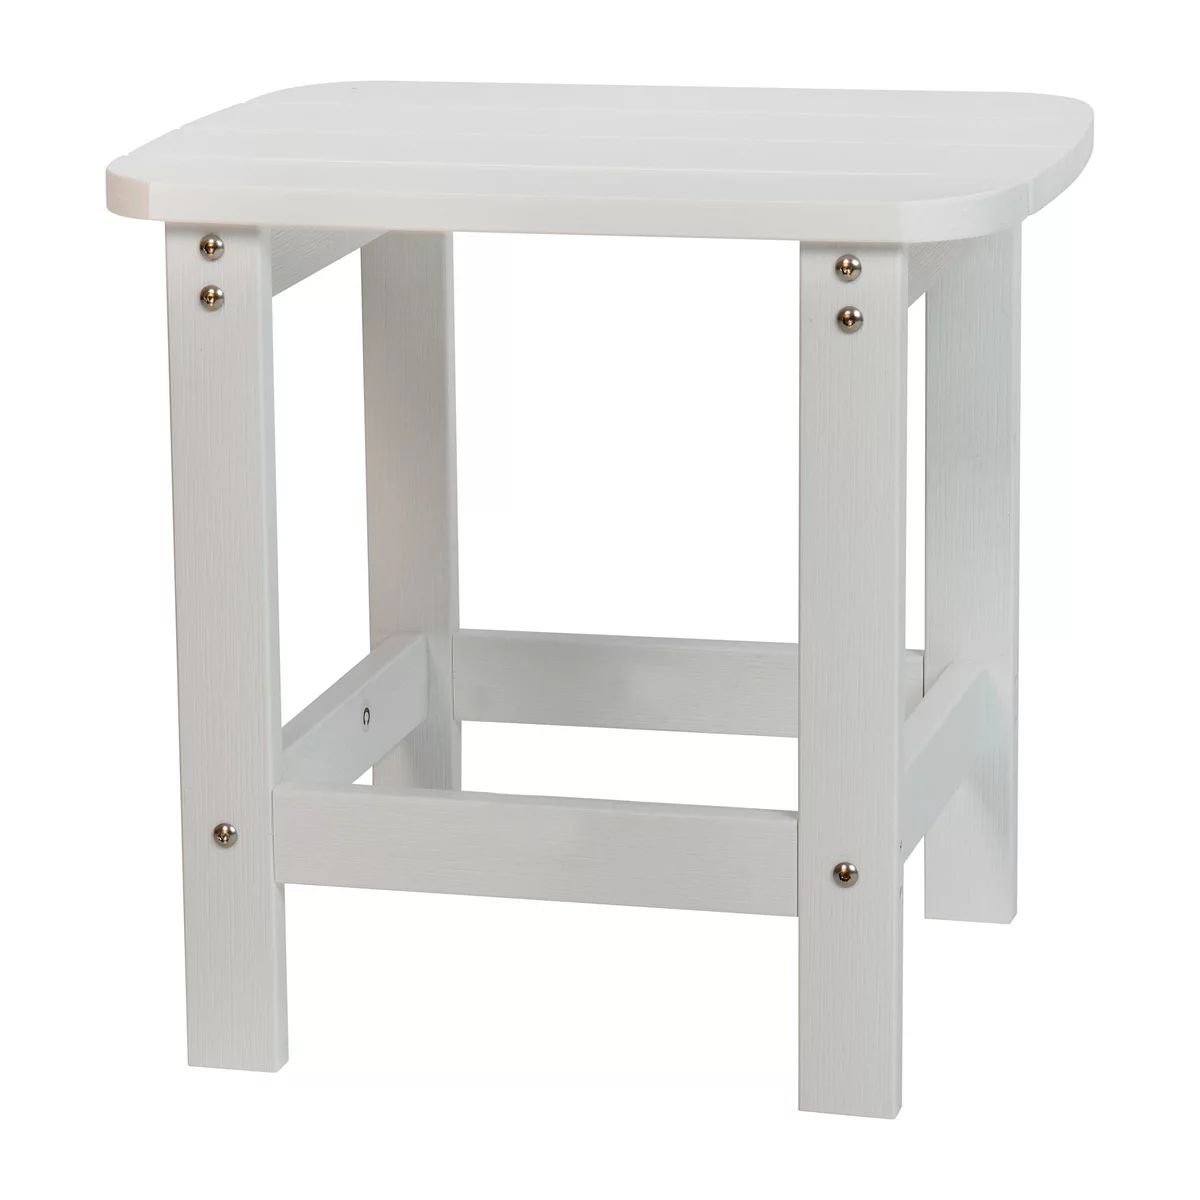 Flash Furniture Charlestown All-Weather Adirondack End Table, Kohl’s End Table, July 4th Patio, Home | Kohl's